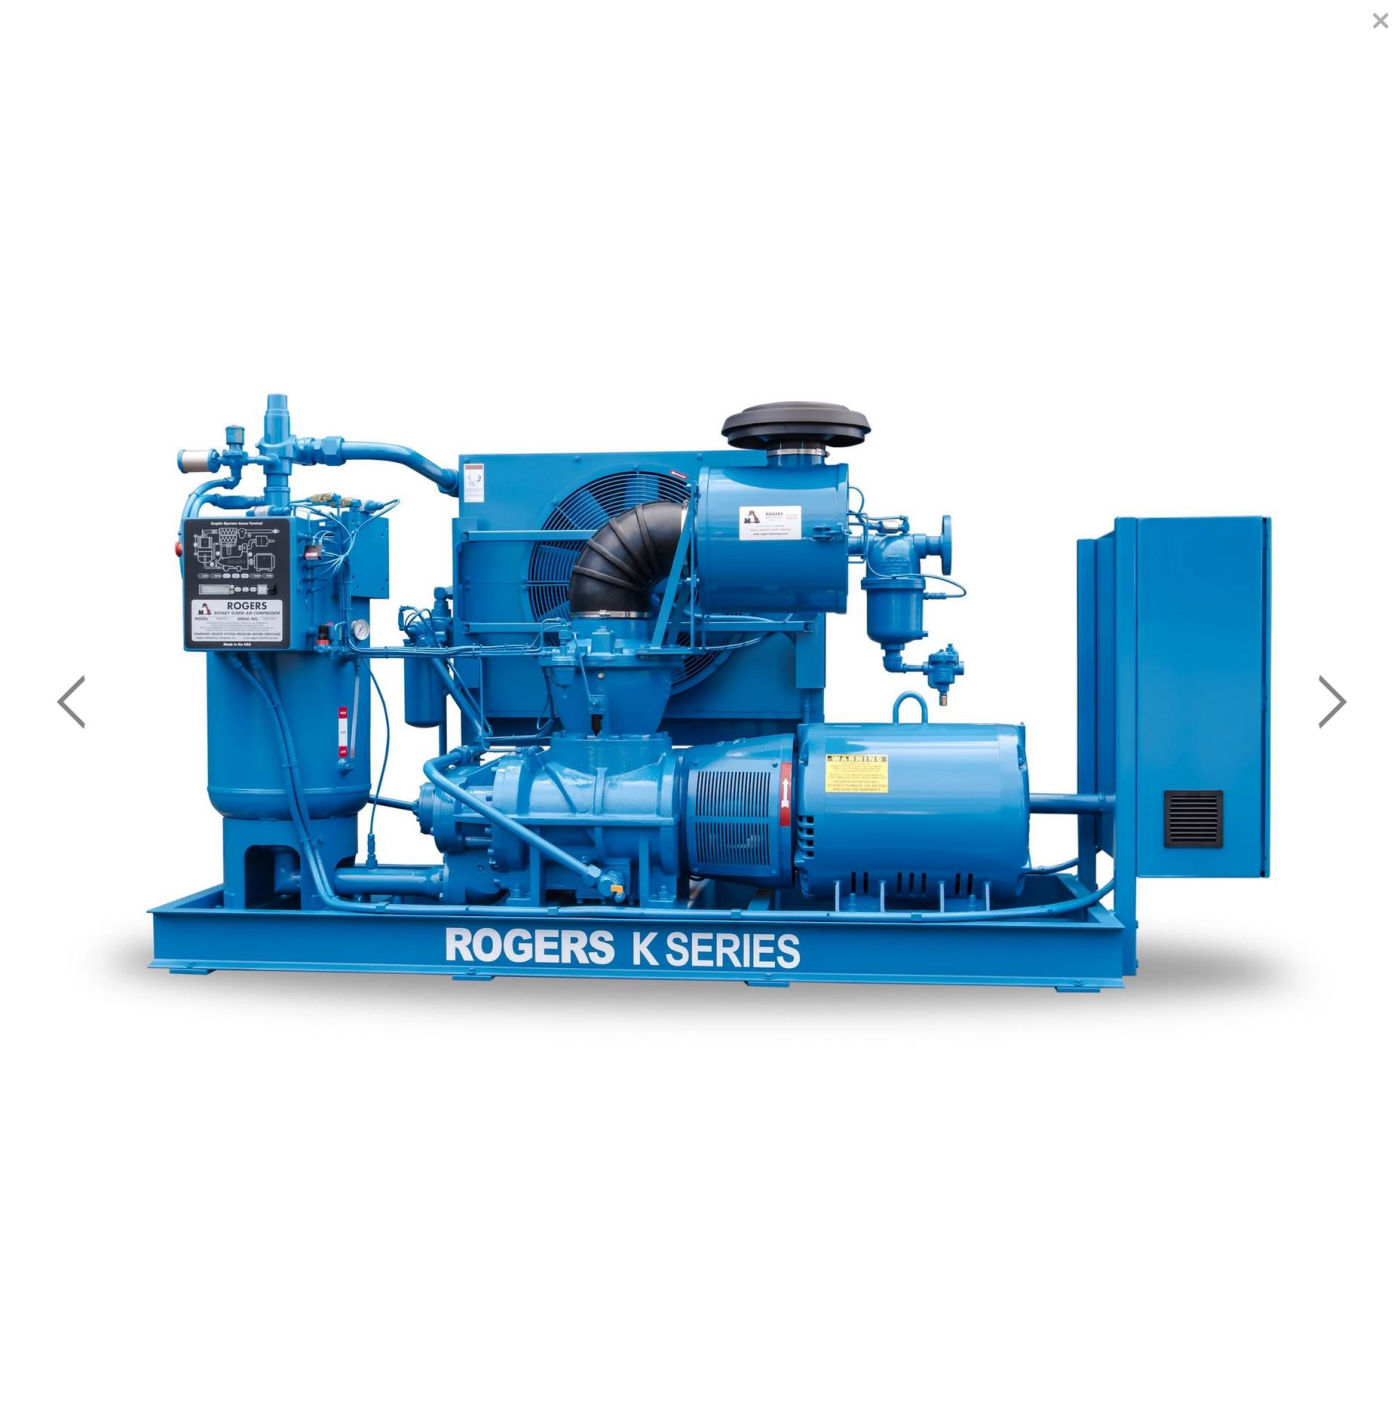 Picture of Roger Machinery K series Rotary Screw Air Compressor